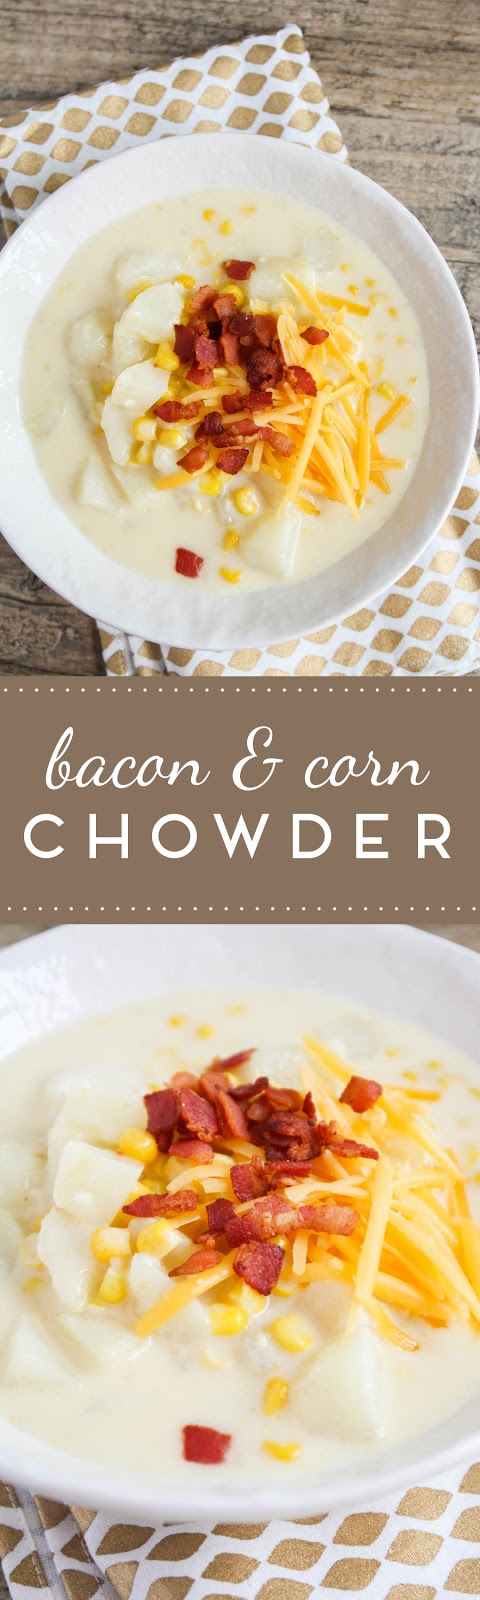 This bacon and corn chowder is perfect for a cold winter night! It's hearty and filling, and so easy to make!